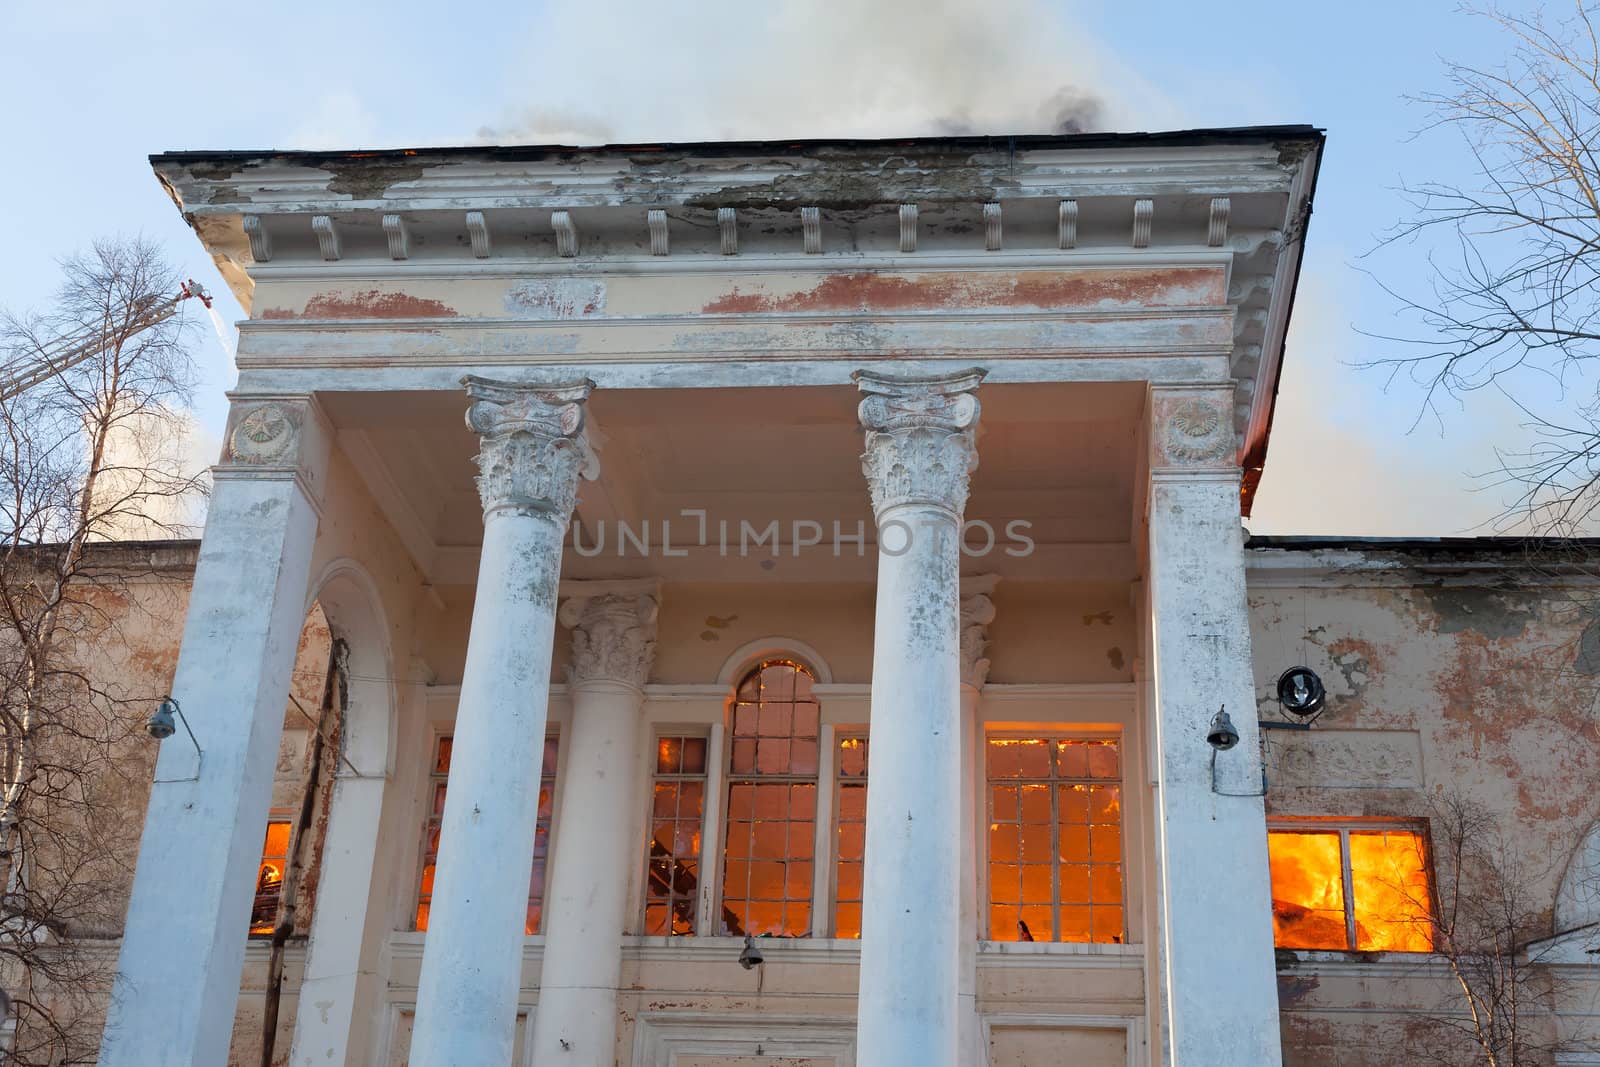 Russia. Kandalaksha. April 2013. A fire in the palace of culture